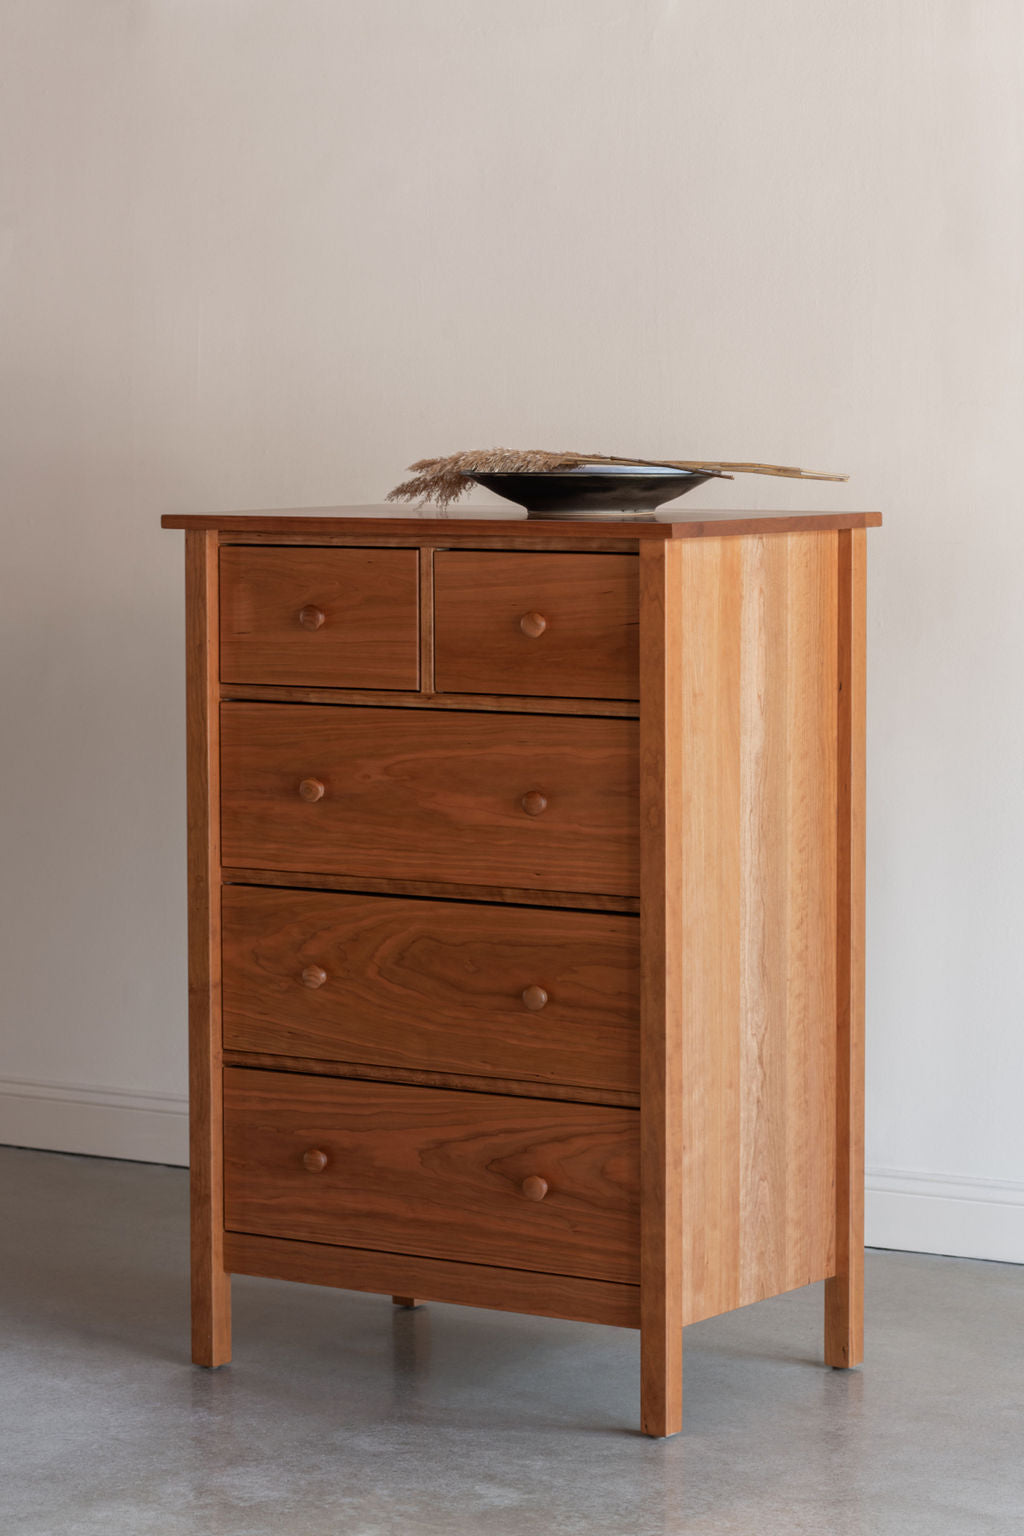 Cherry Bethel Shaker Chest in modern room with minimal decor